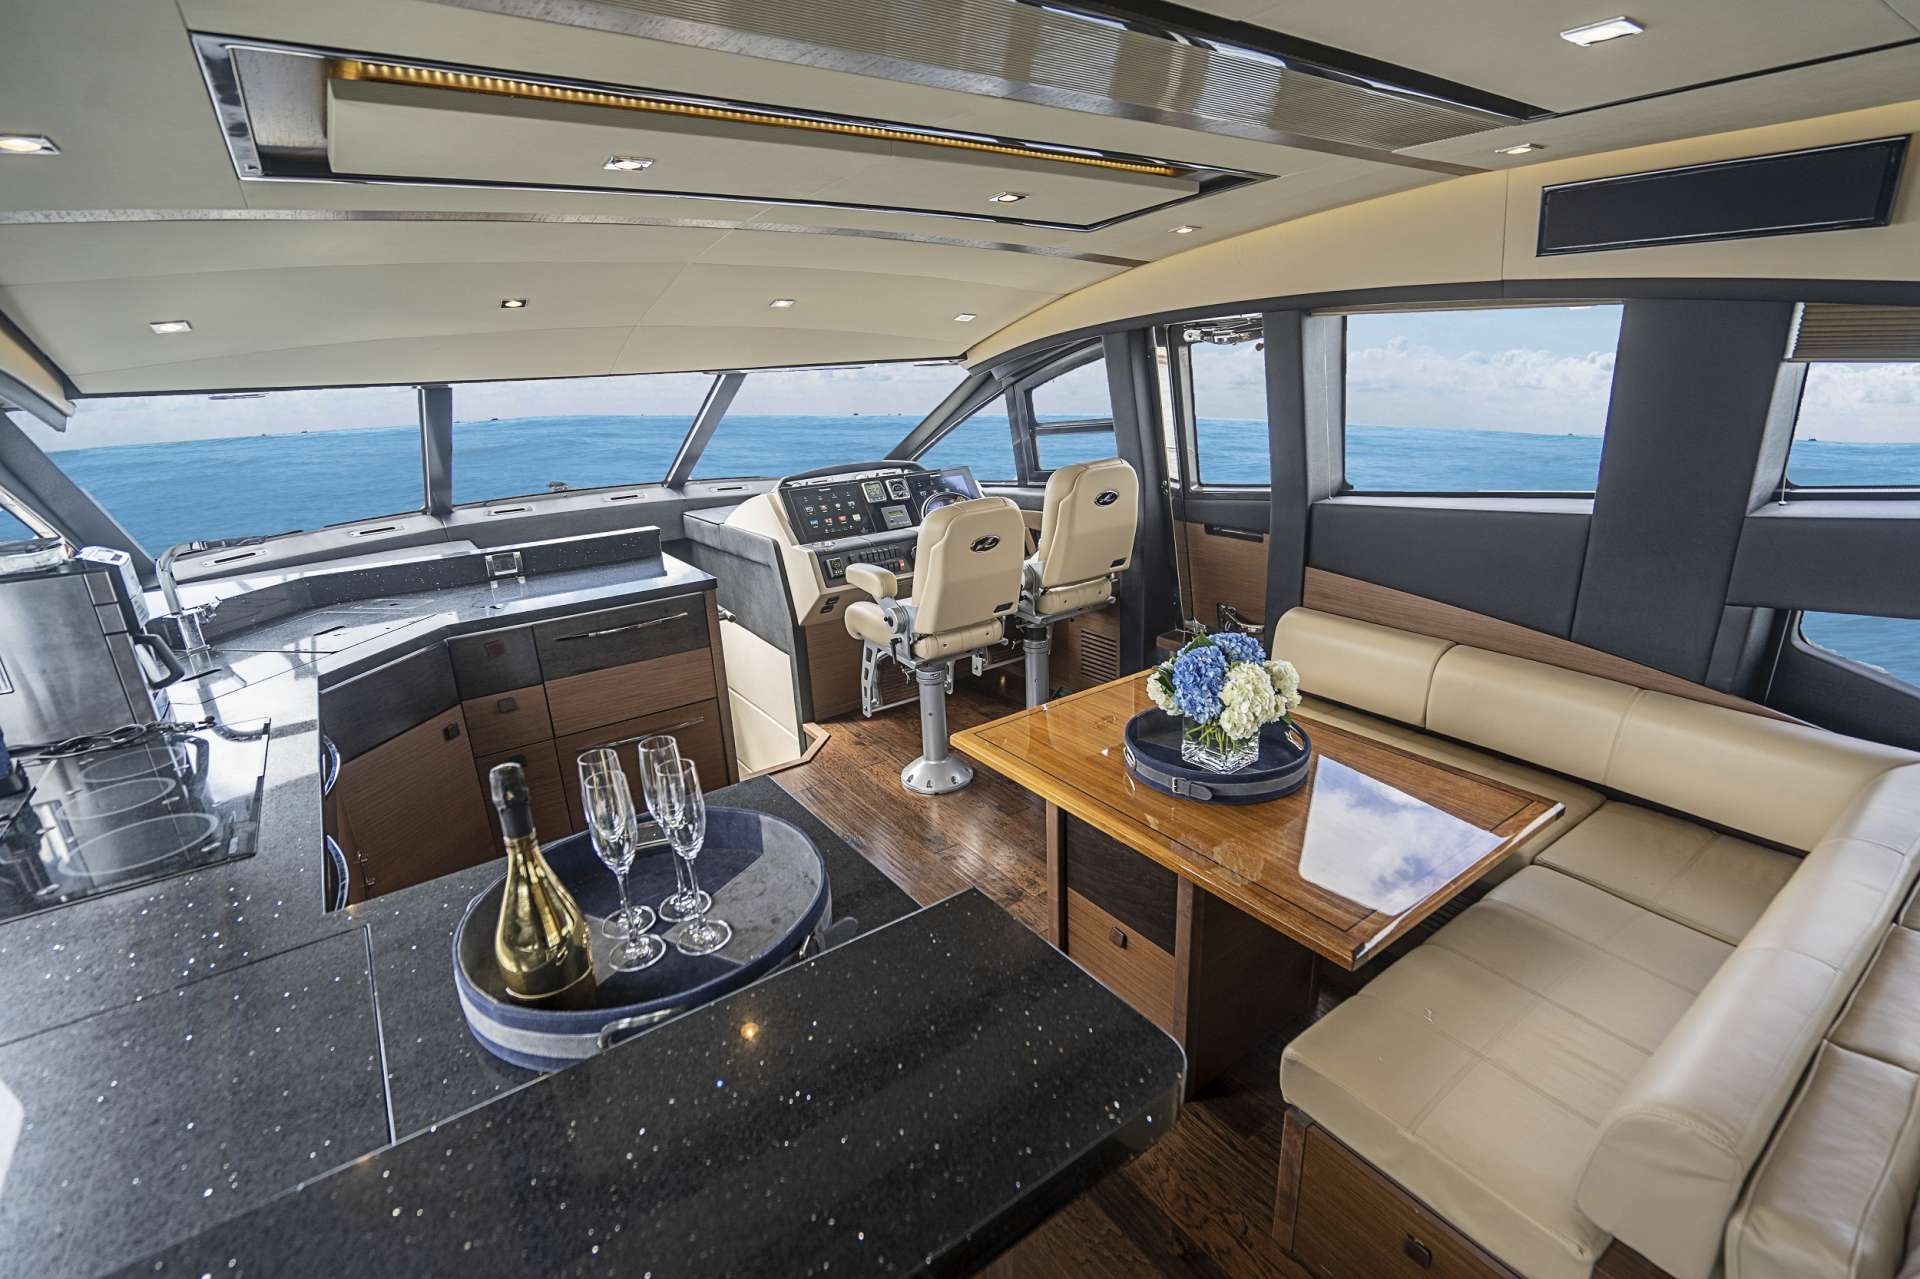 Motor Yacht 'MR. GV' Salon galley with bar and seating, 5 PAX, 65.00 Ft, 19.00 Meters, Built 2016, Sea Ray